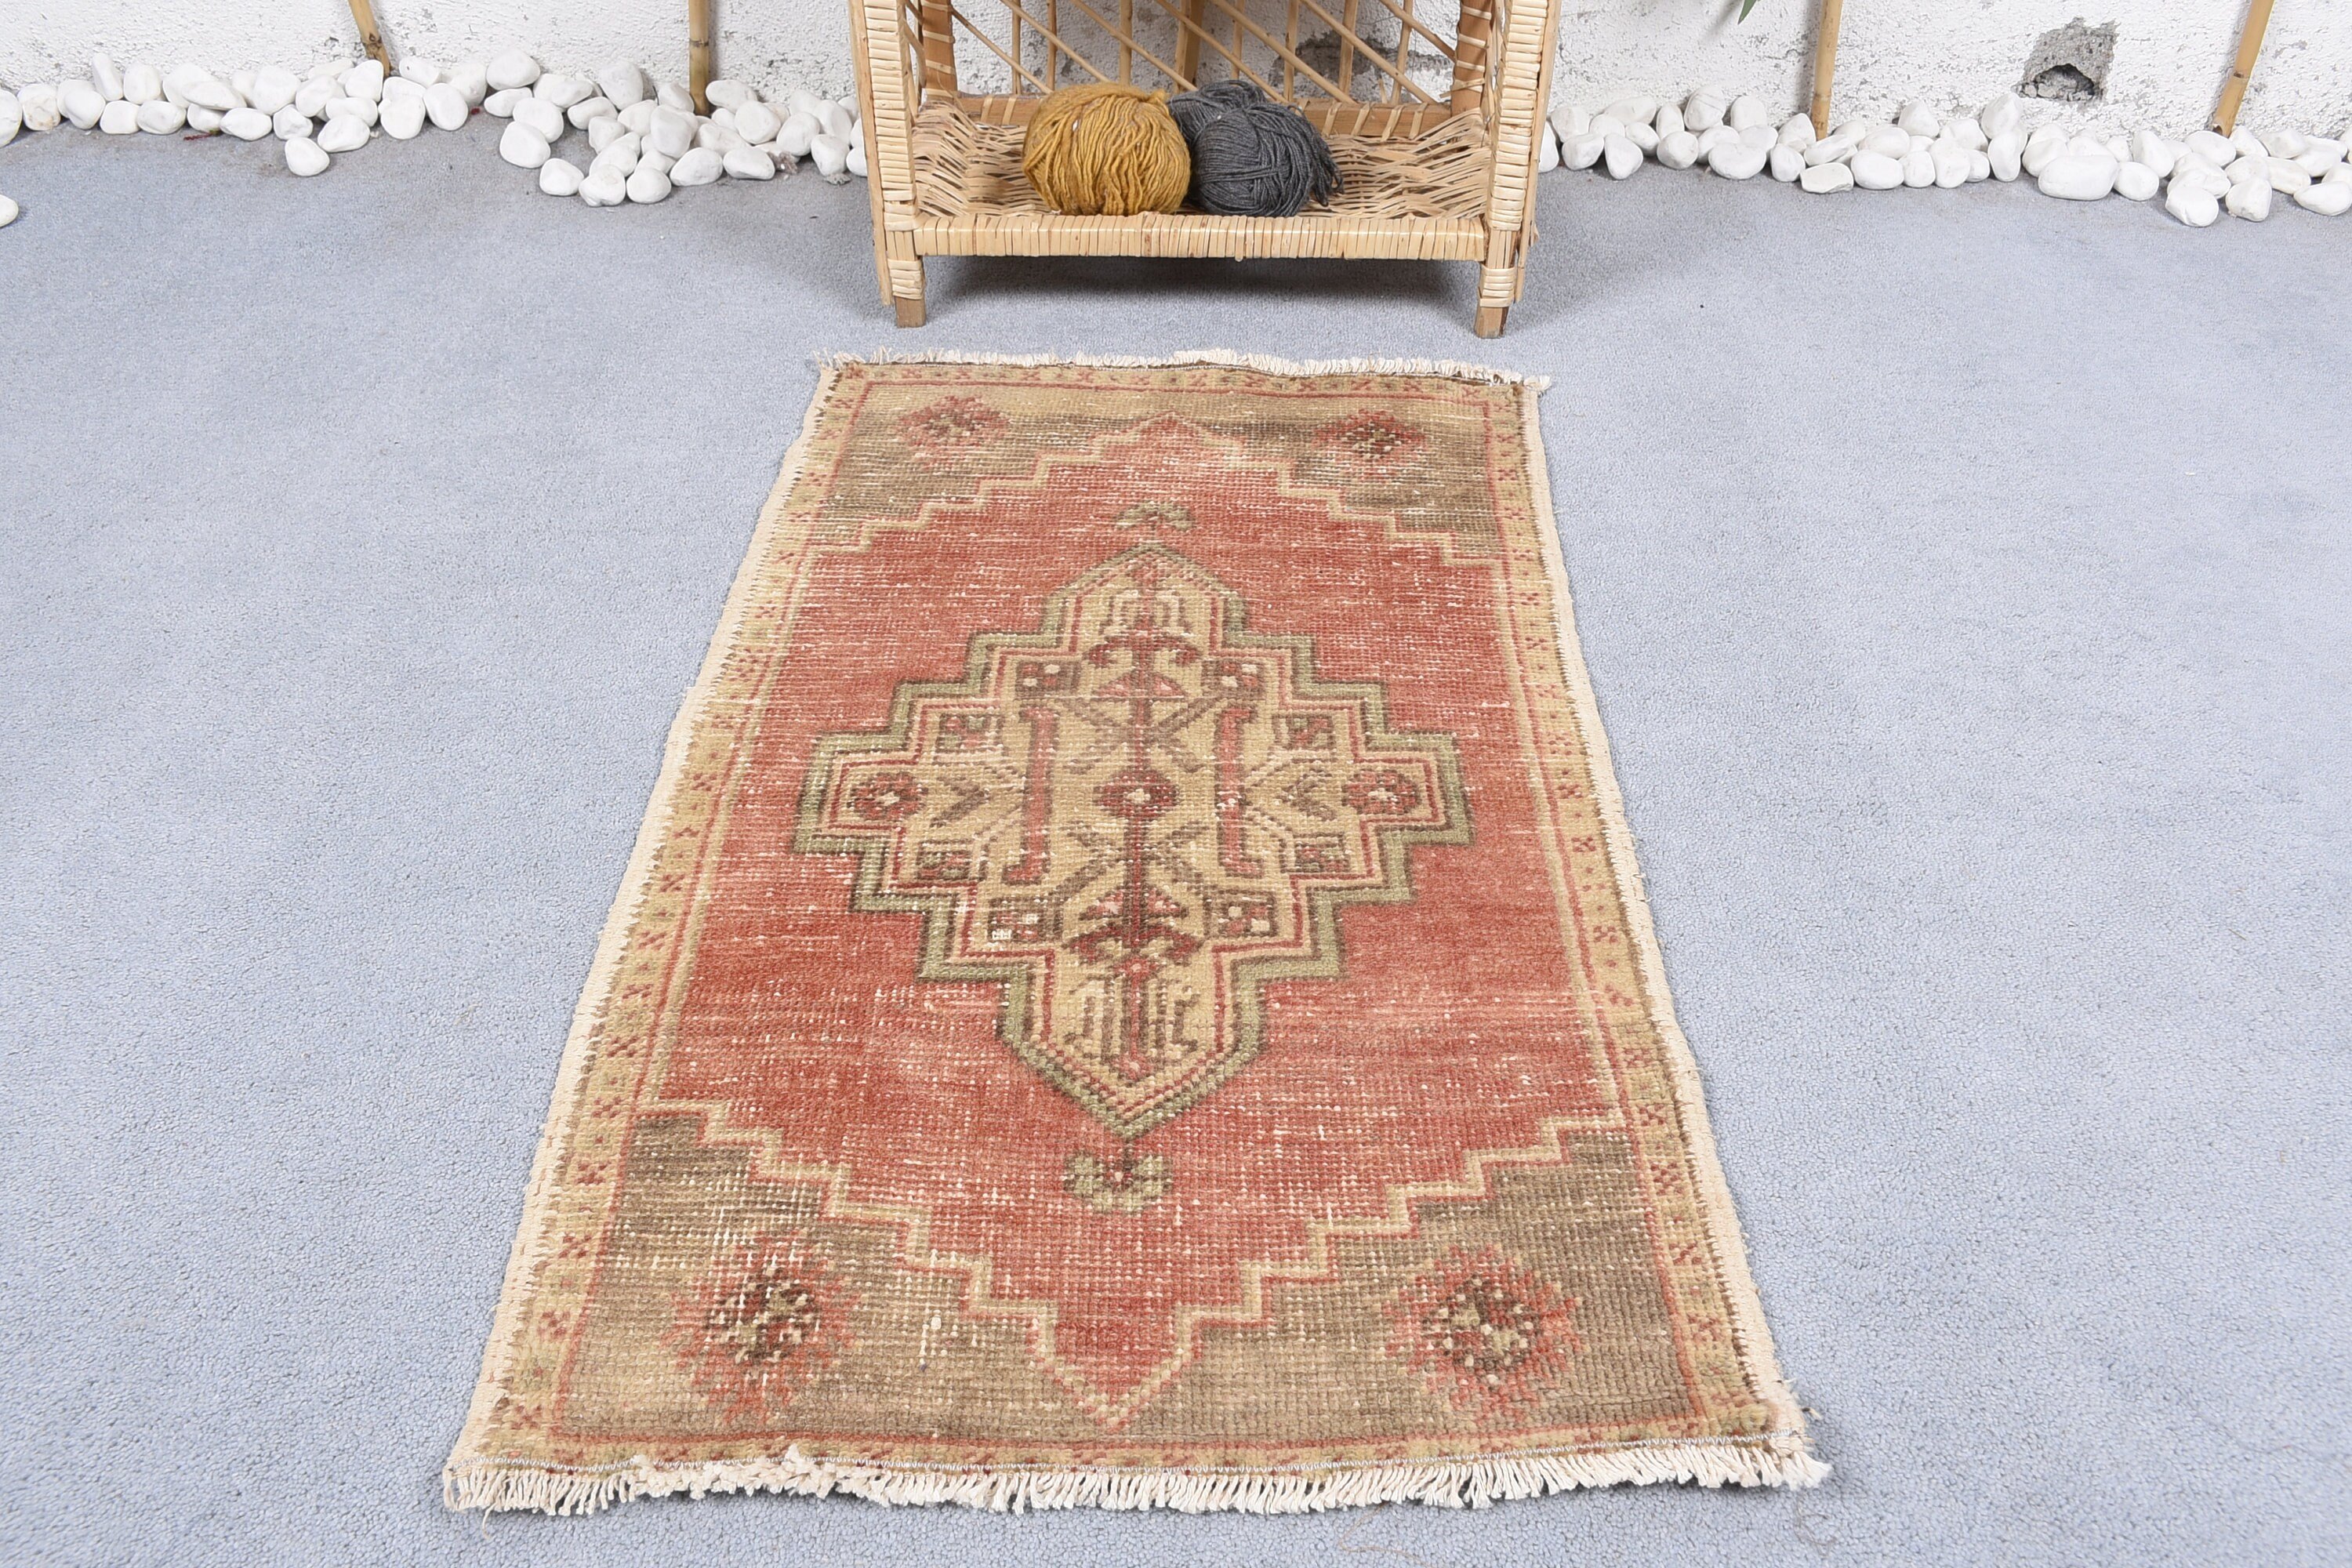 1.8x3 ft Small Rug, Turkish Rug, Nursery Rugs, Rugs for Bath, Anatolian Rugs, Antique Rugs, Vintage Rug, Designer Rug, Red Kitchen Rugs